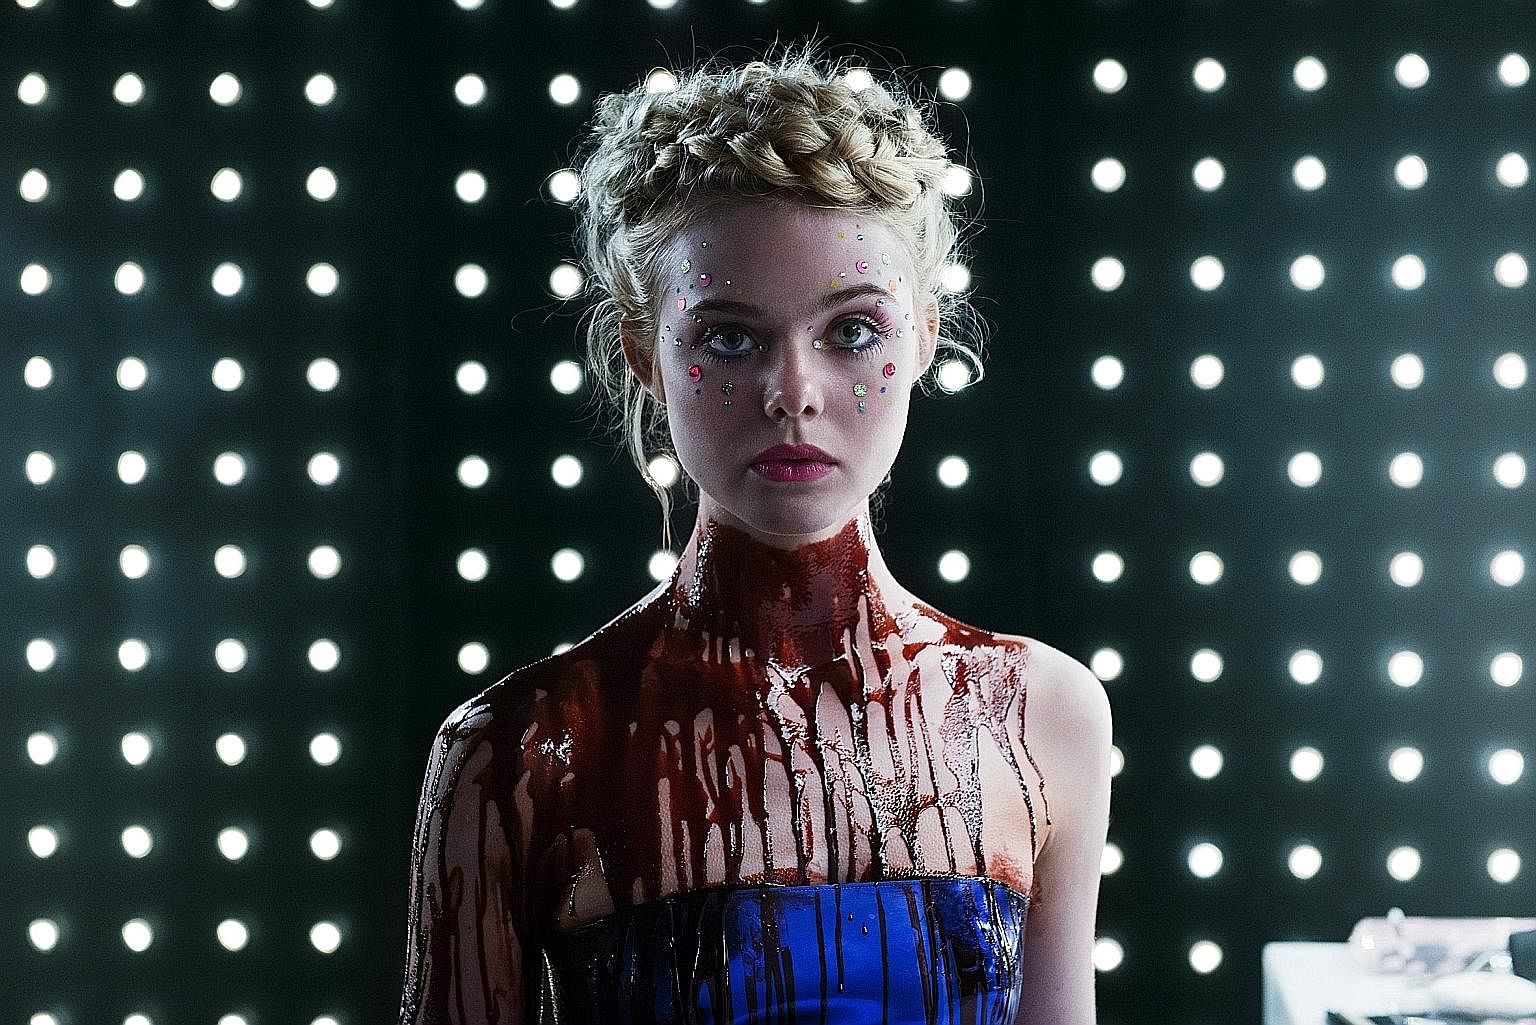 Elle Fanning (left) plays a model with otherworldly beauty in The Neon Demon.